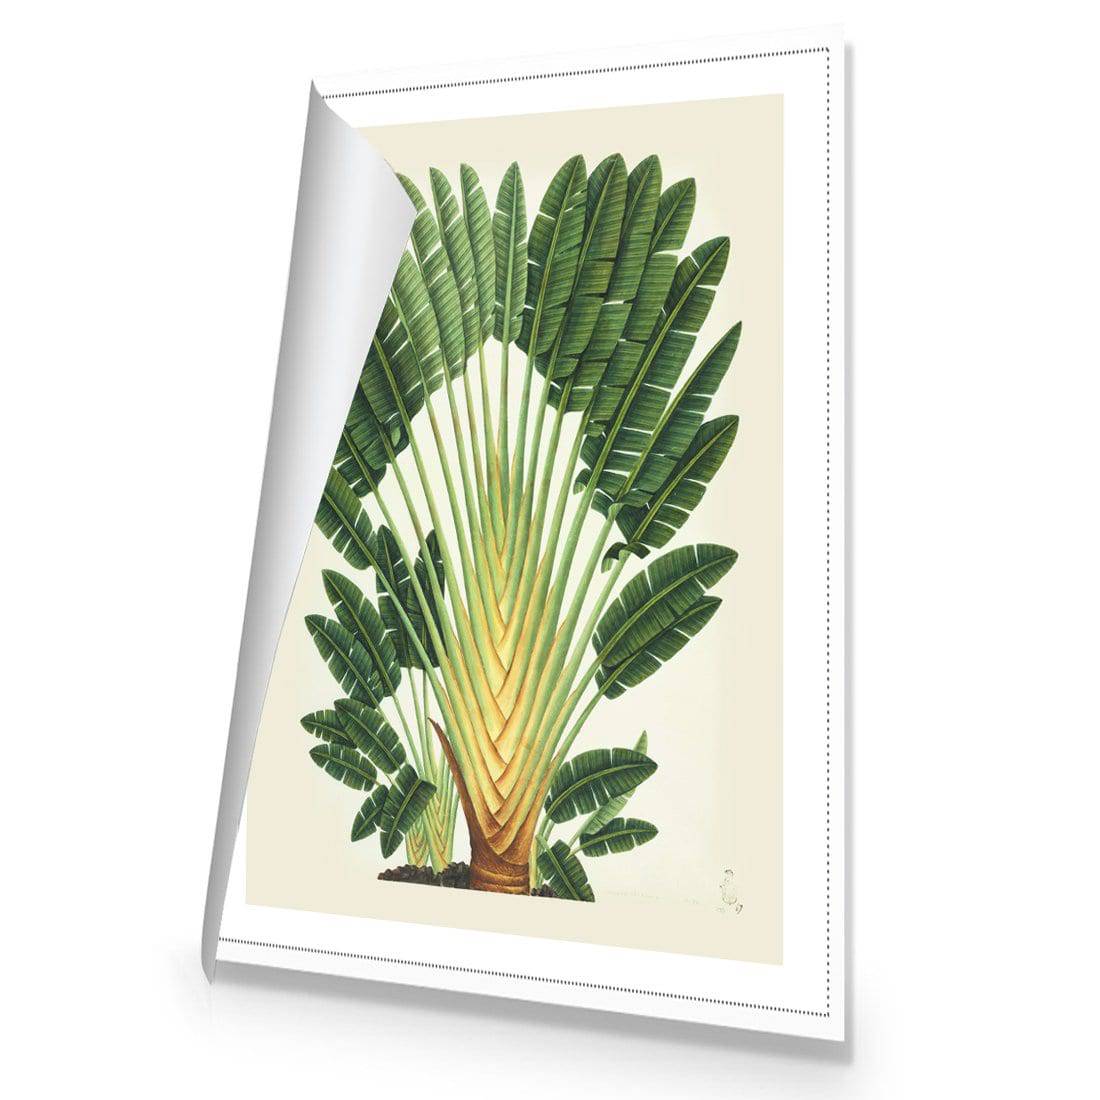 Traveller's Palm Tree Canvas Art-Canvas-Wall Art Designs-45x30cm-Rolled Canvas-Wall Art Designs